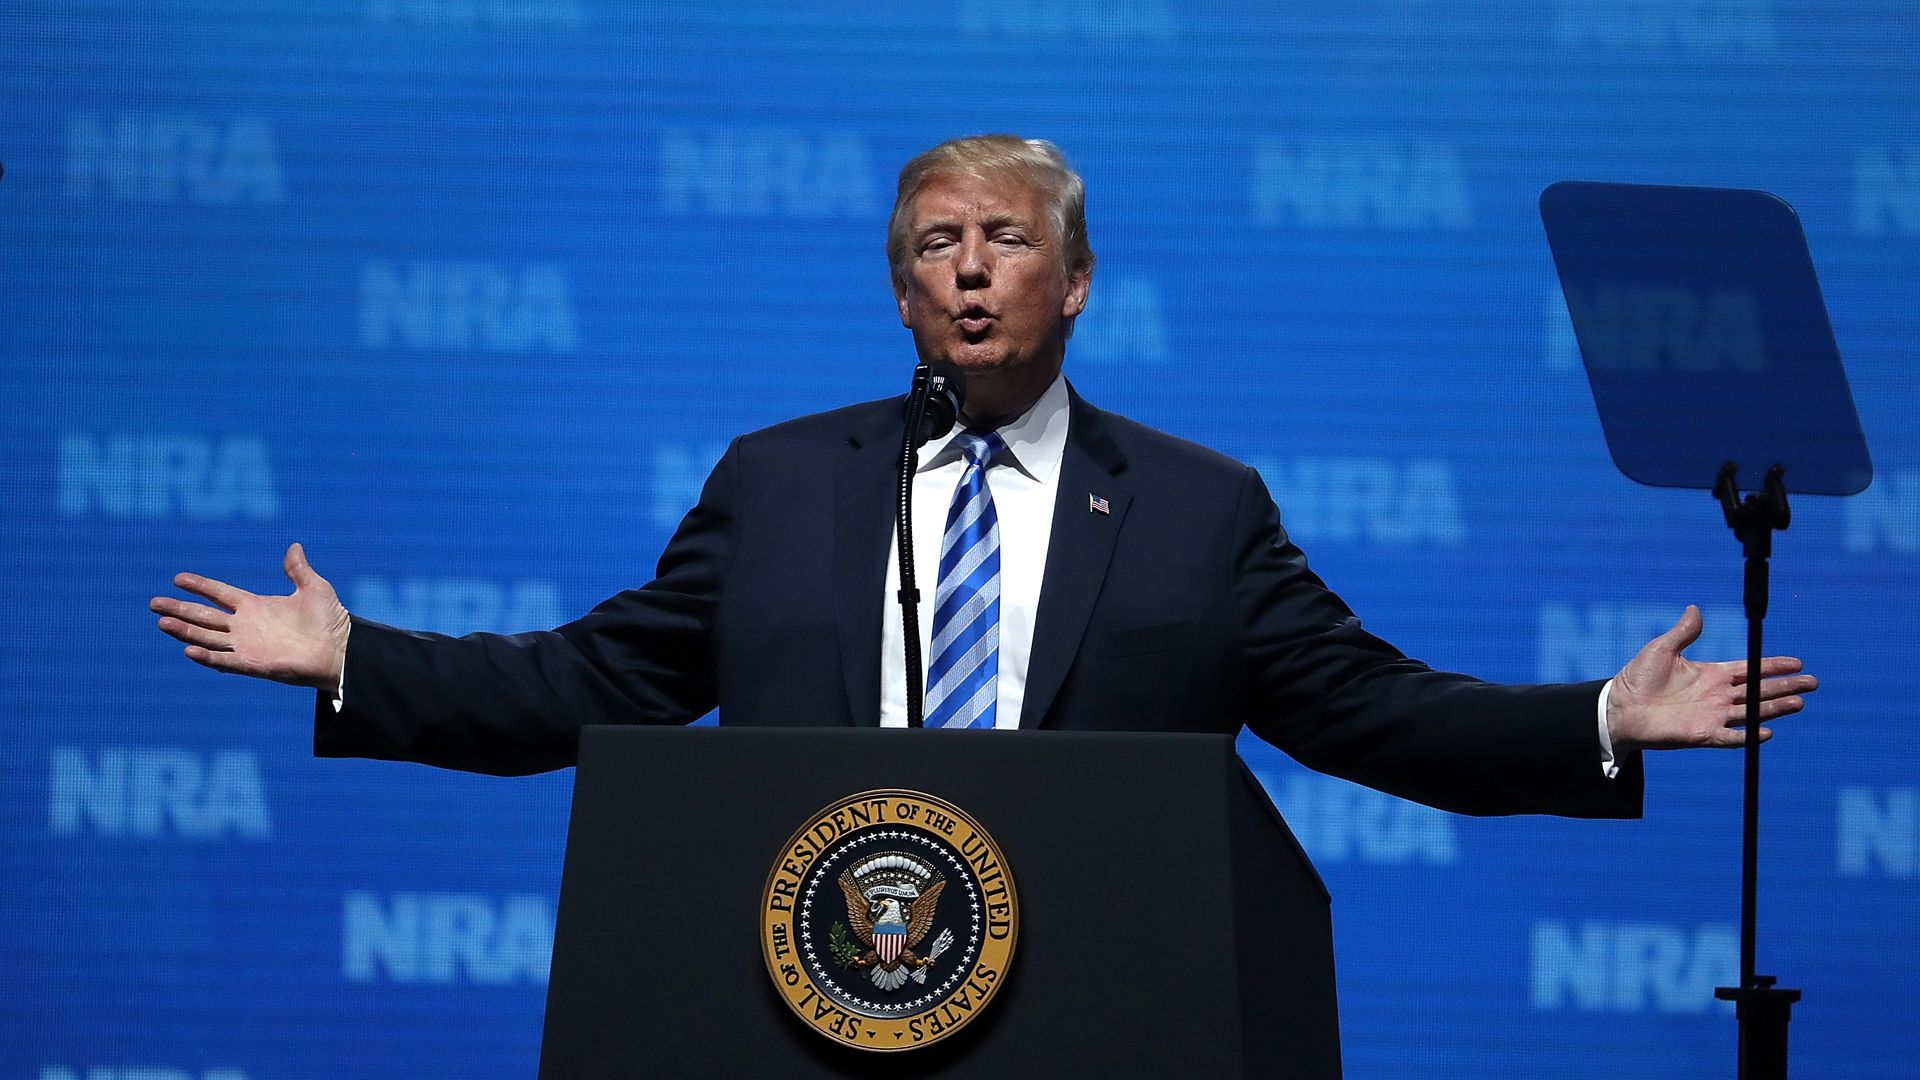 President Trump delivering a speech to the NRA